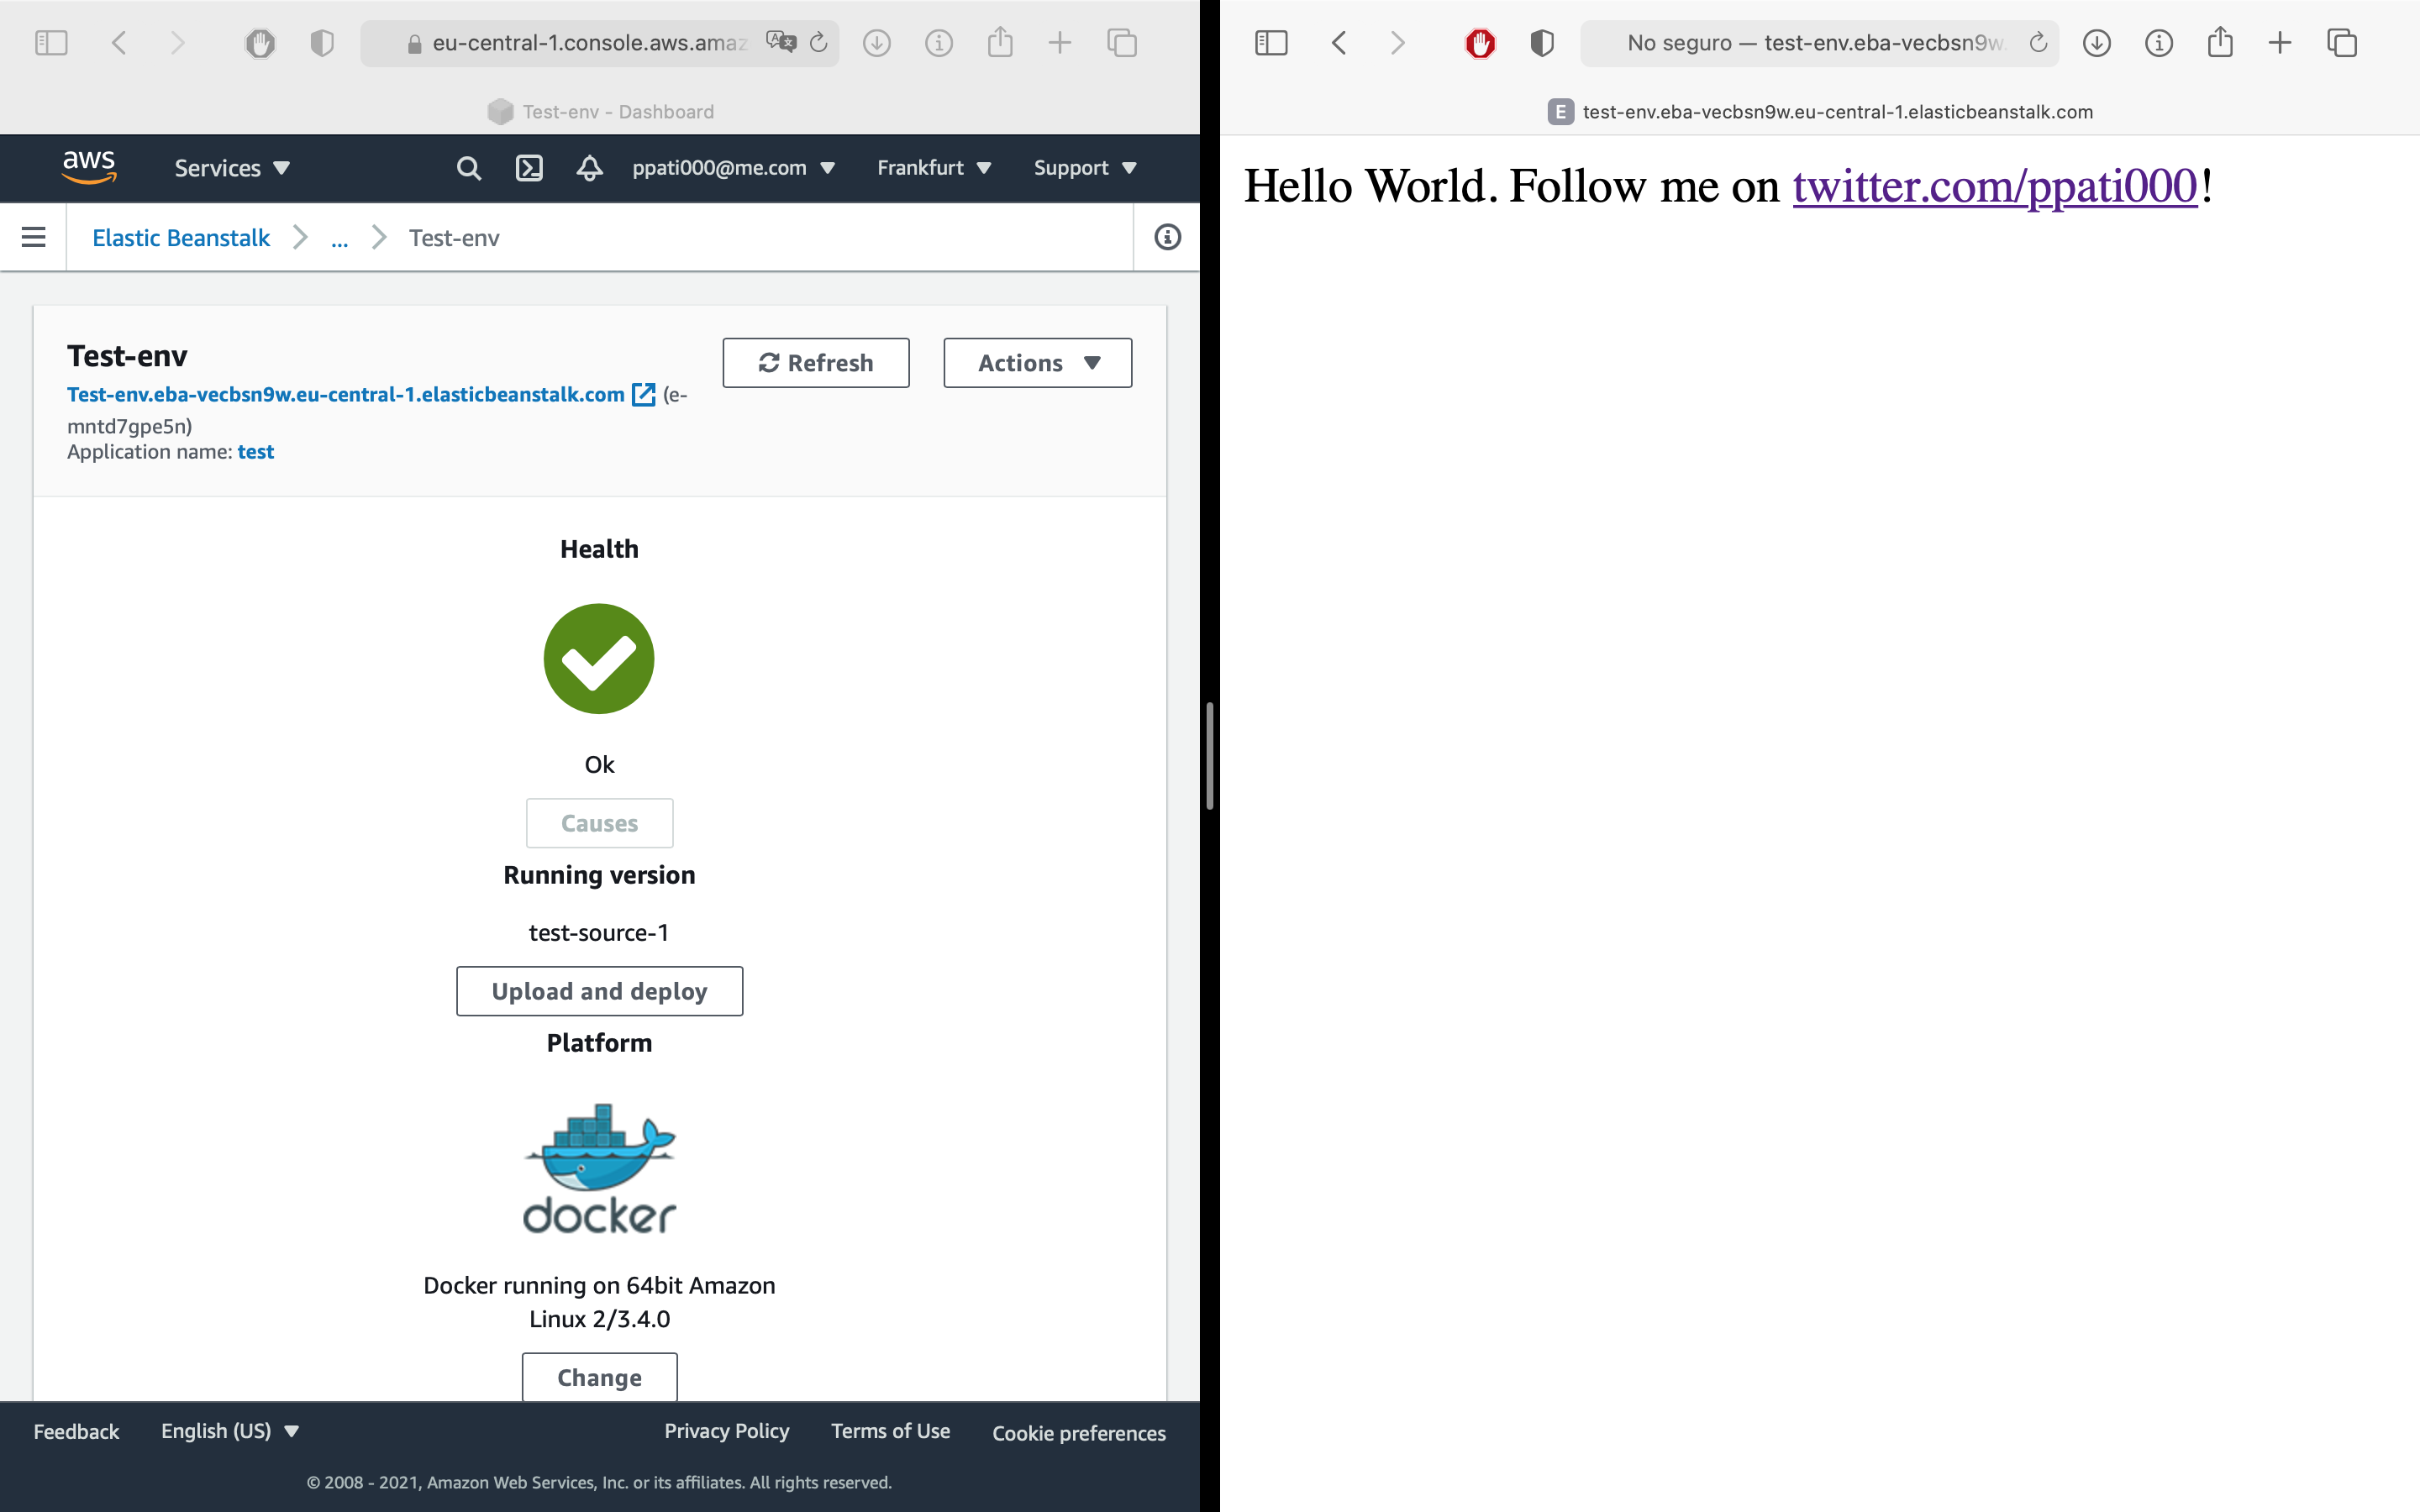 The Amazon Elastic Beanstalk status page is showing us that everything is up and running.